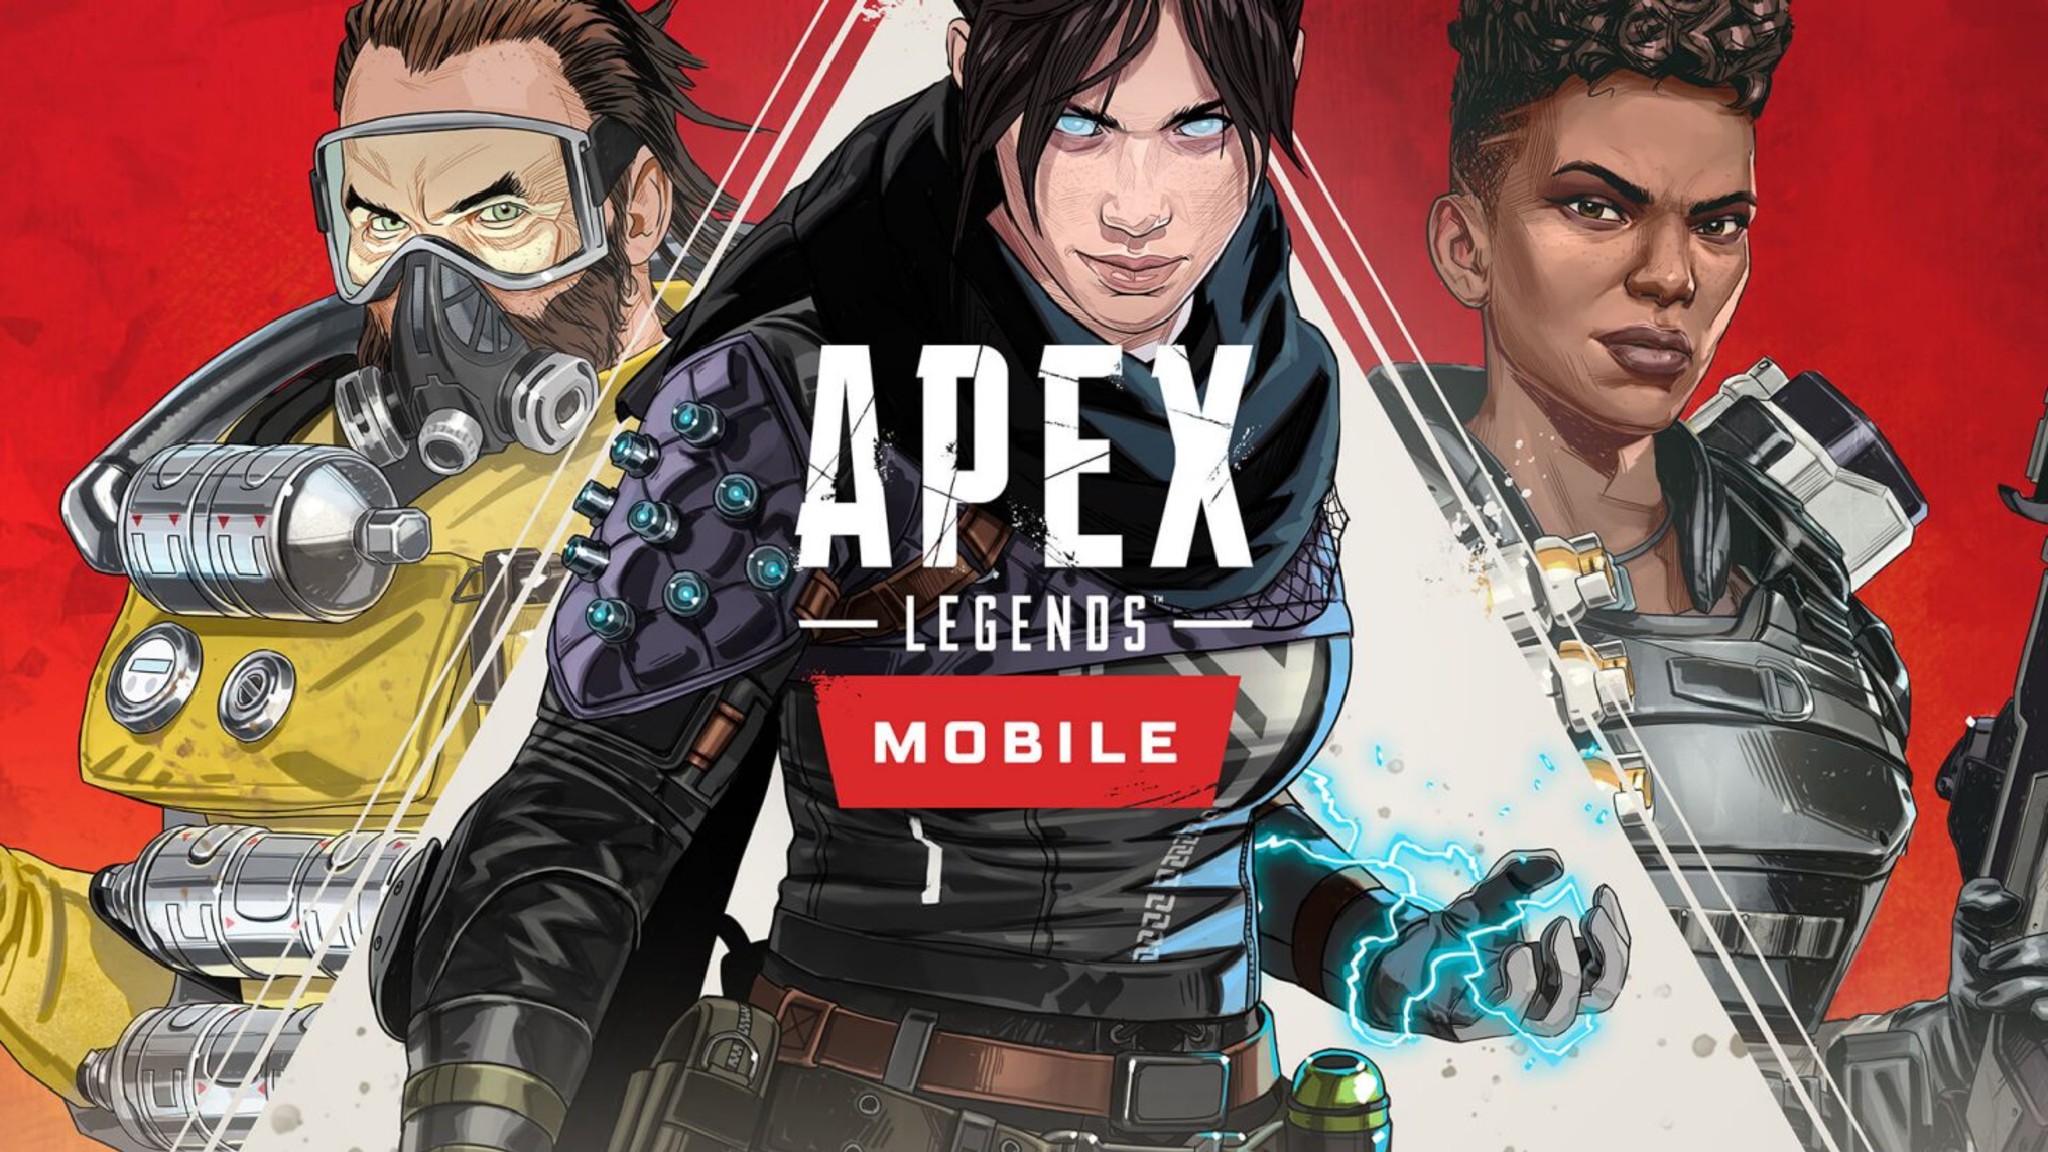 When can you use Apex Legends Mobile for Android?